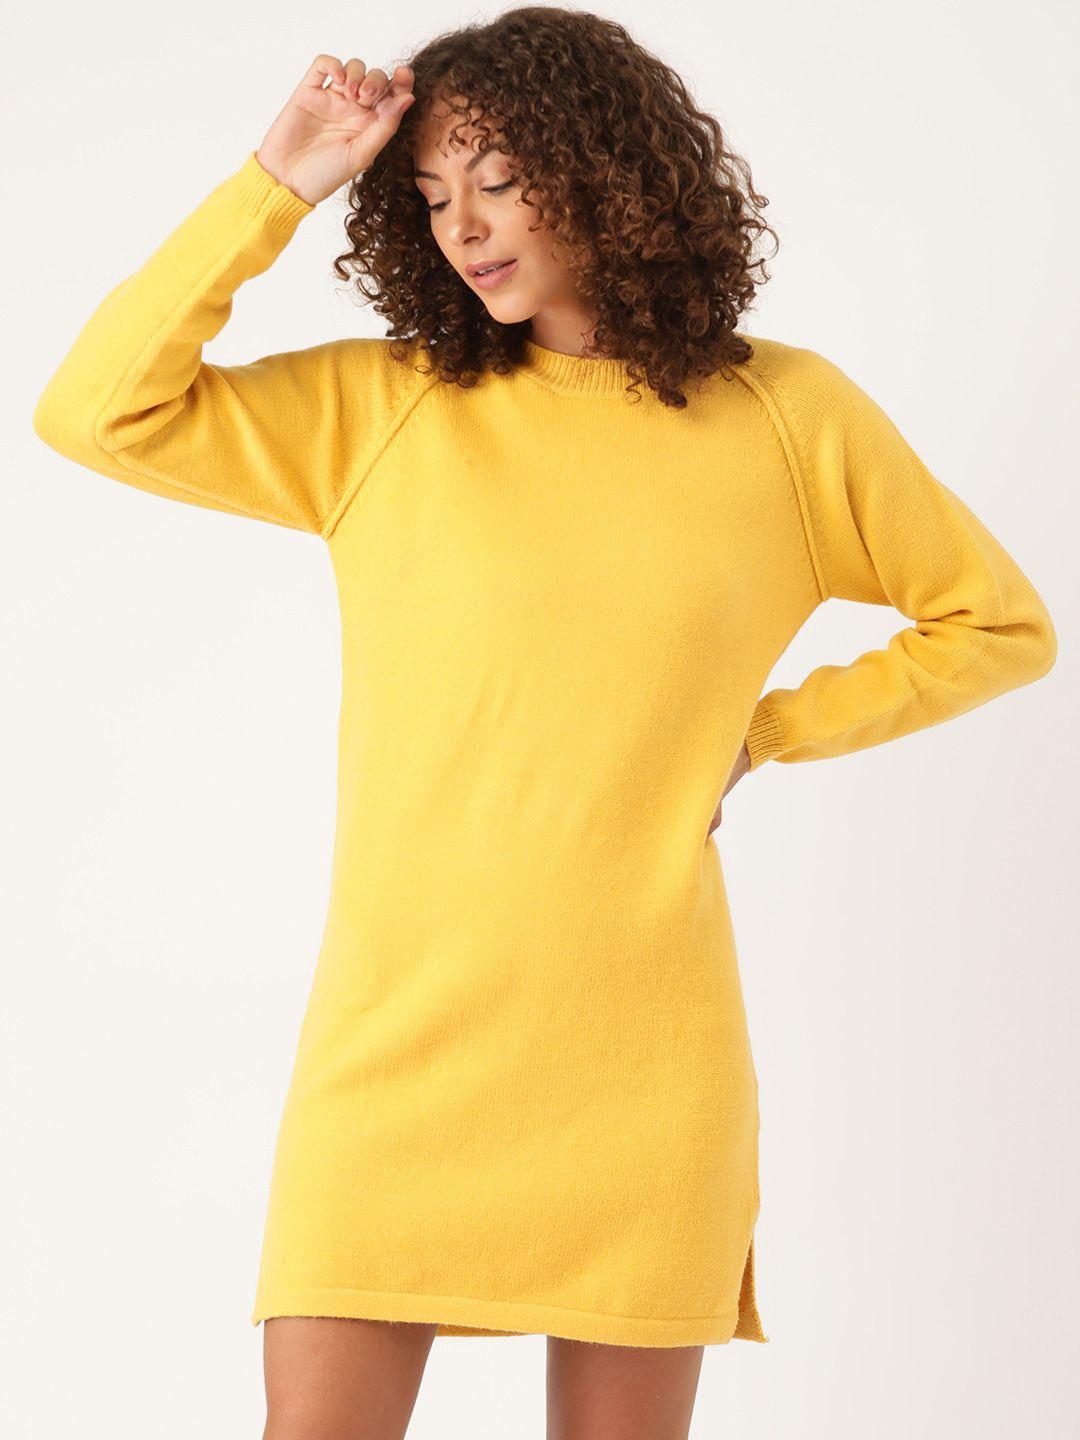 and-mustard-yellow-solid-sweater-dress